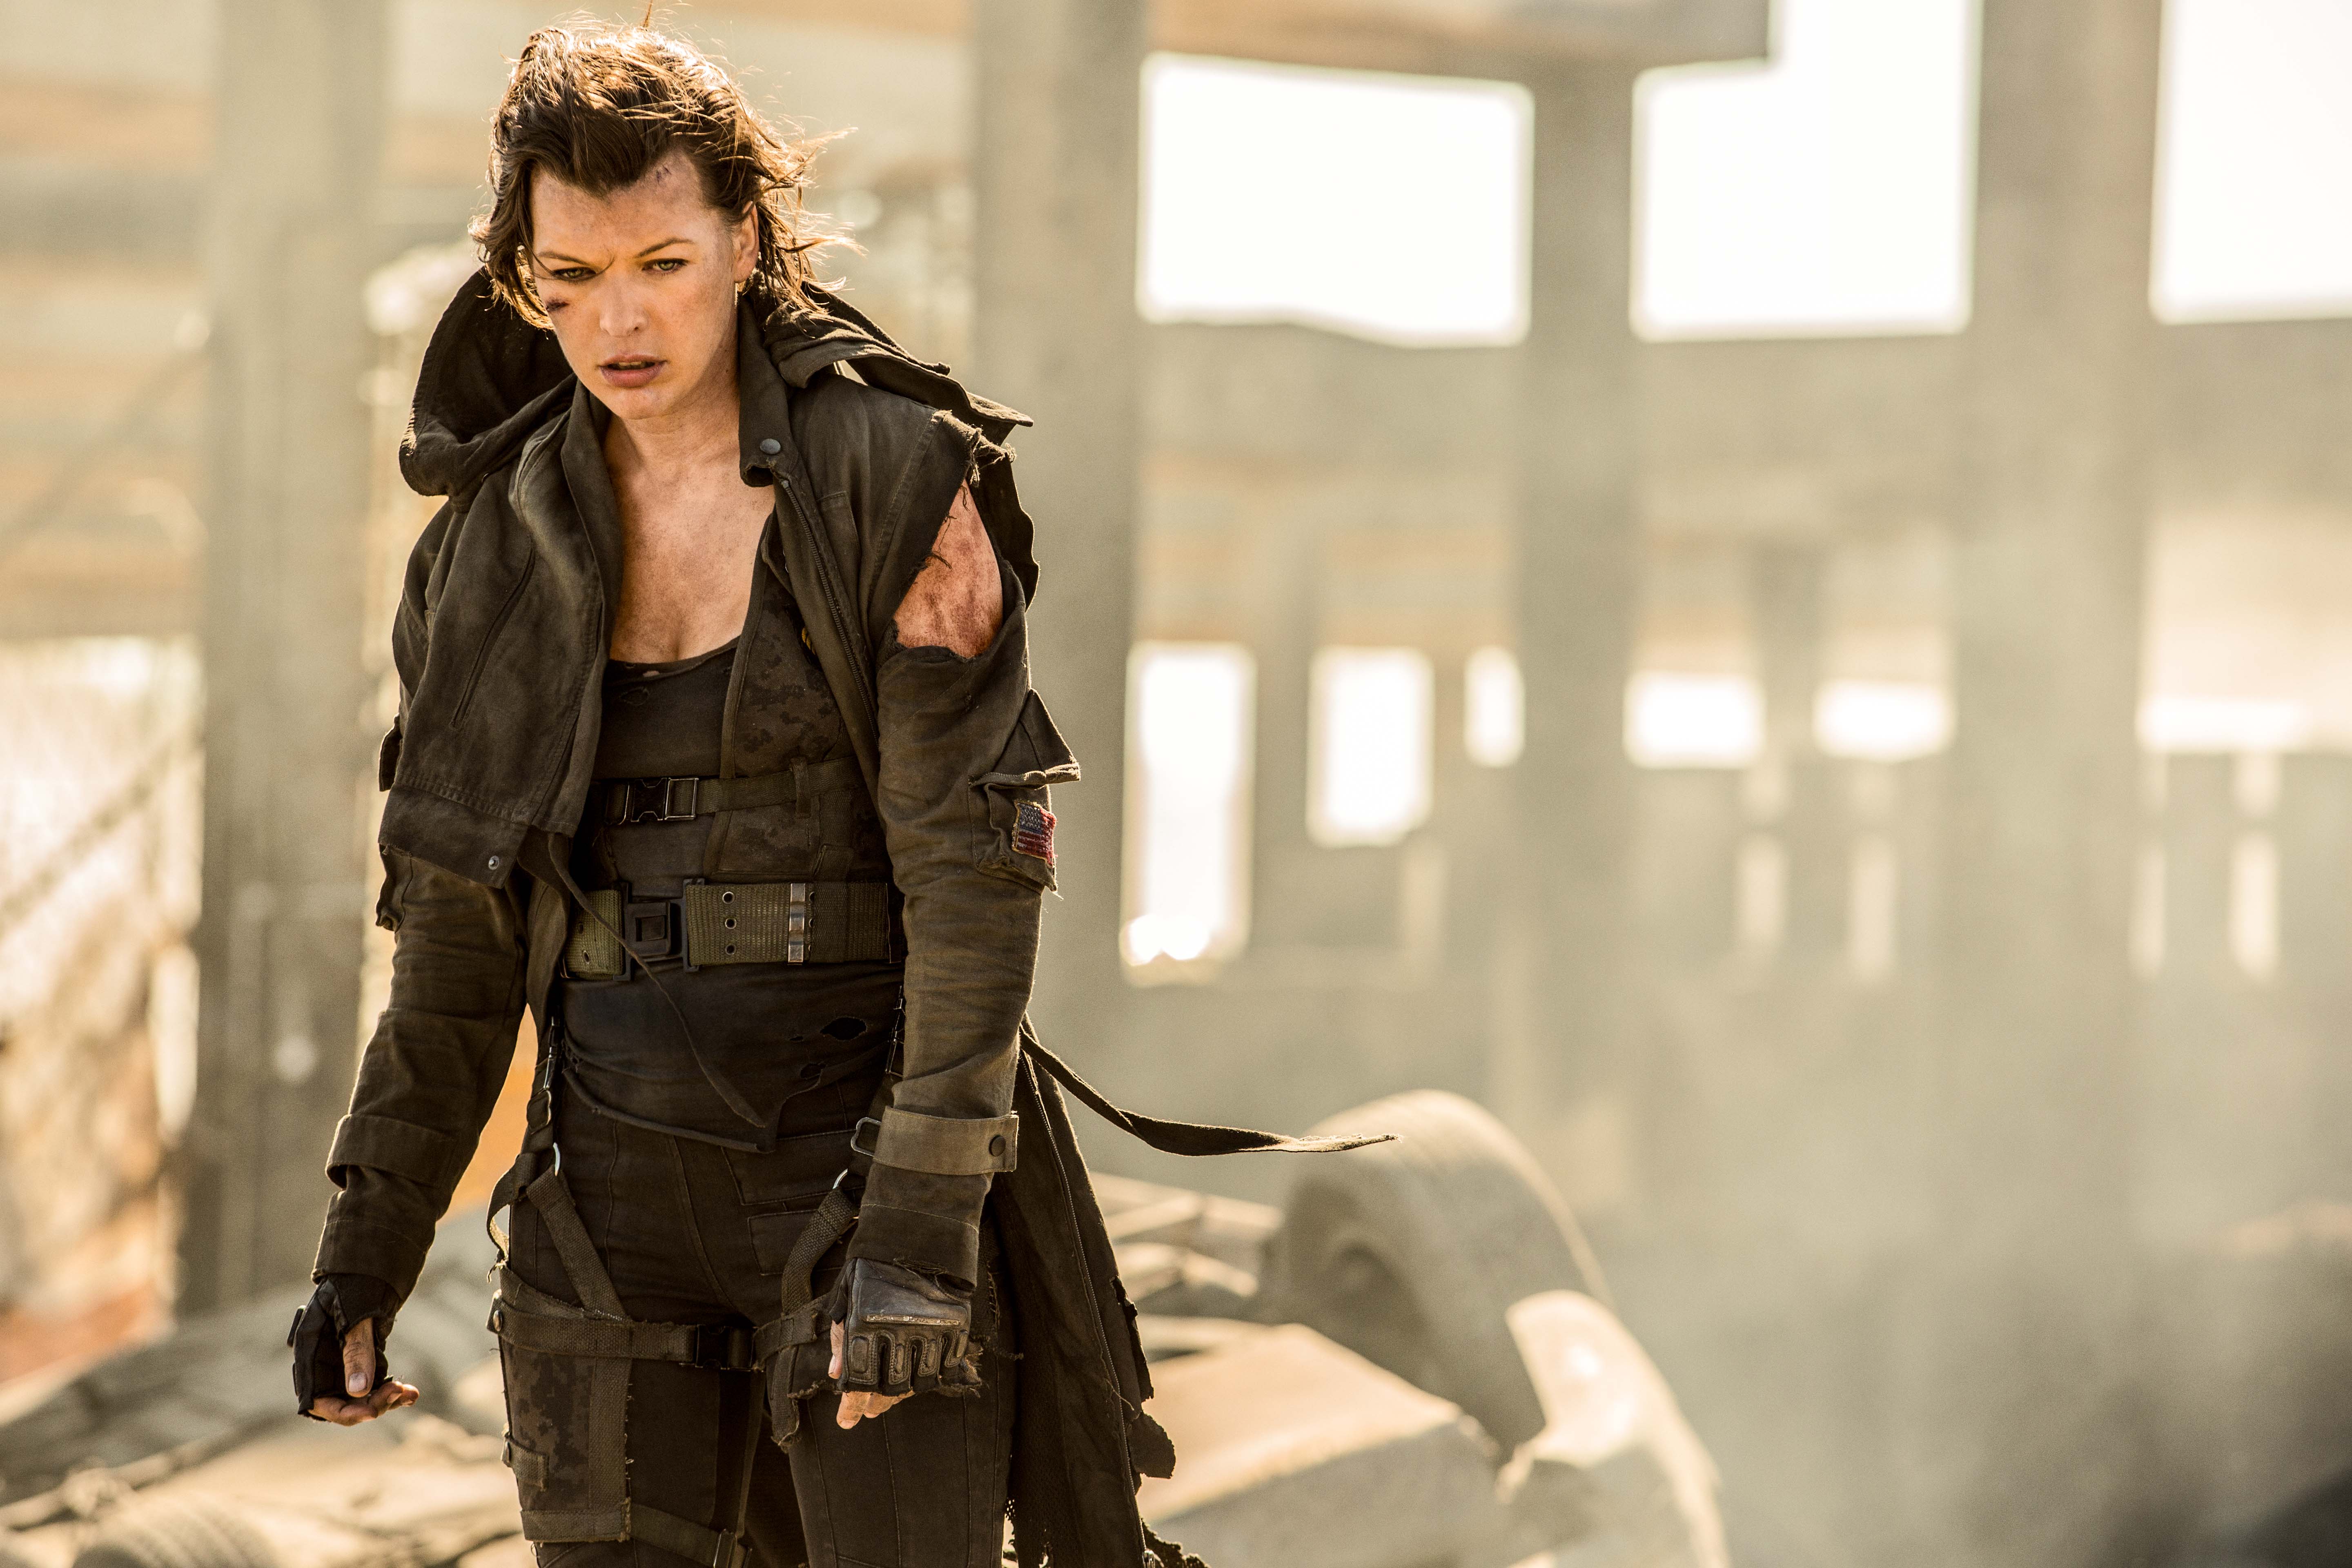 Milla Jovovich & Ali Larter Drop New 'Resident Evil' Trailer at NYCC -  Watch Now!: Photo 3780384